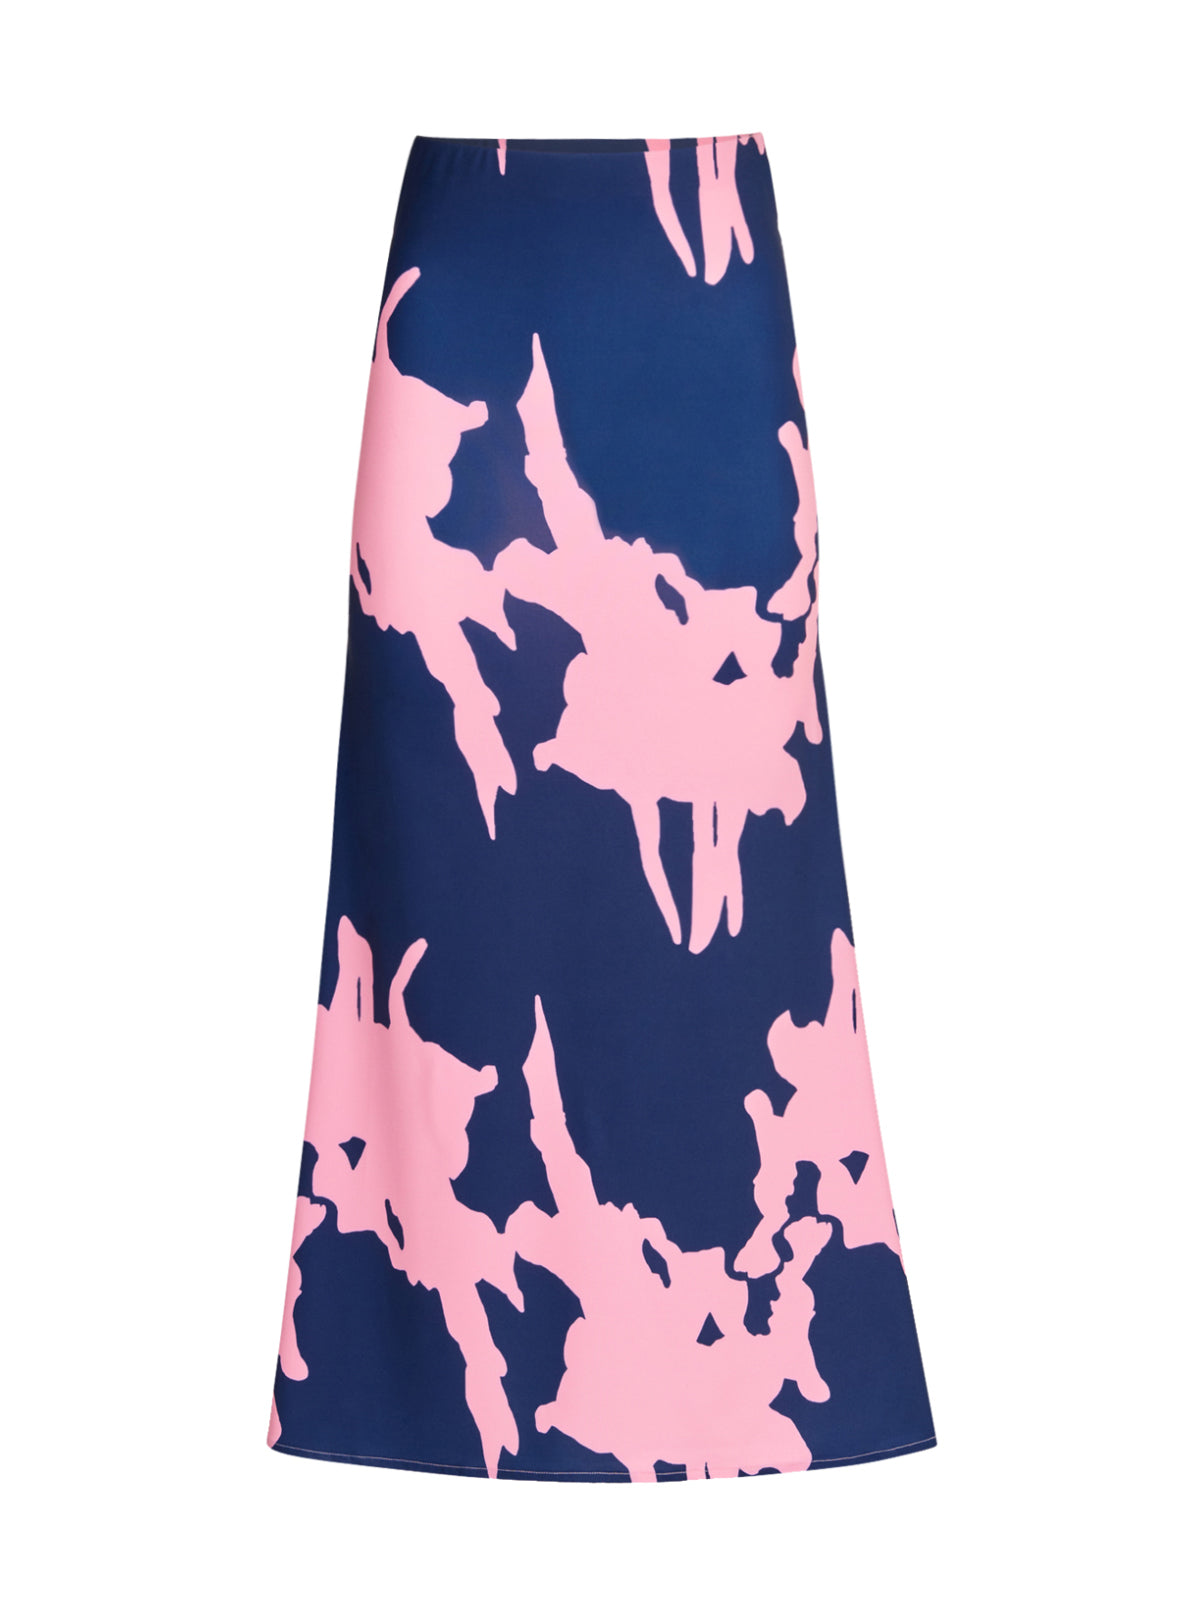 A Trieste Skirt Pink Navy with a camouflage print and elastic waistband.